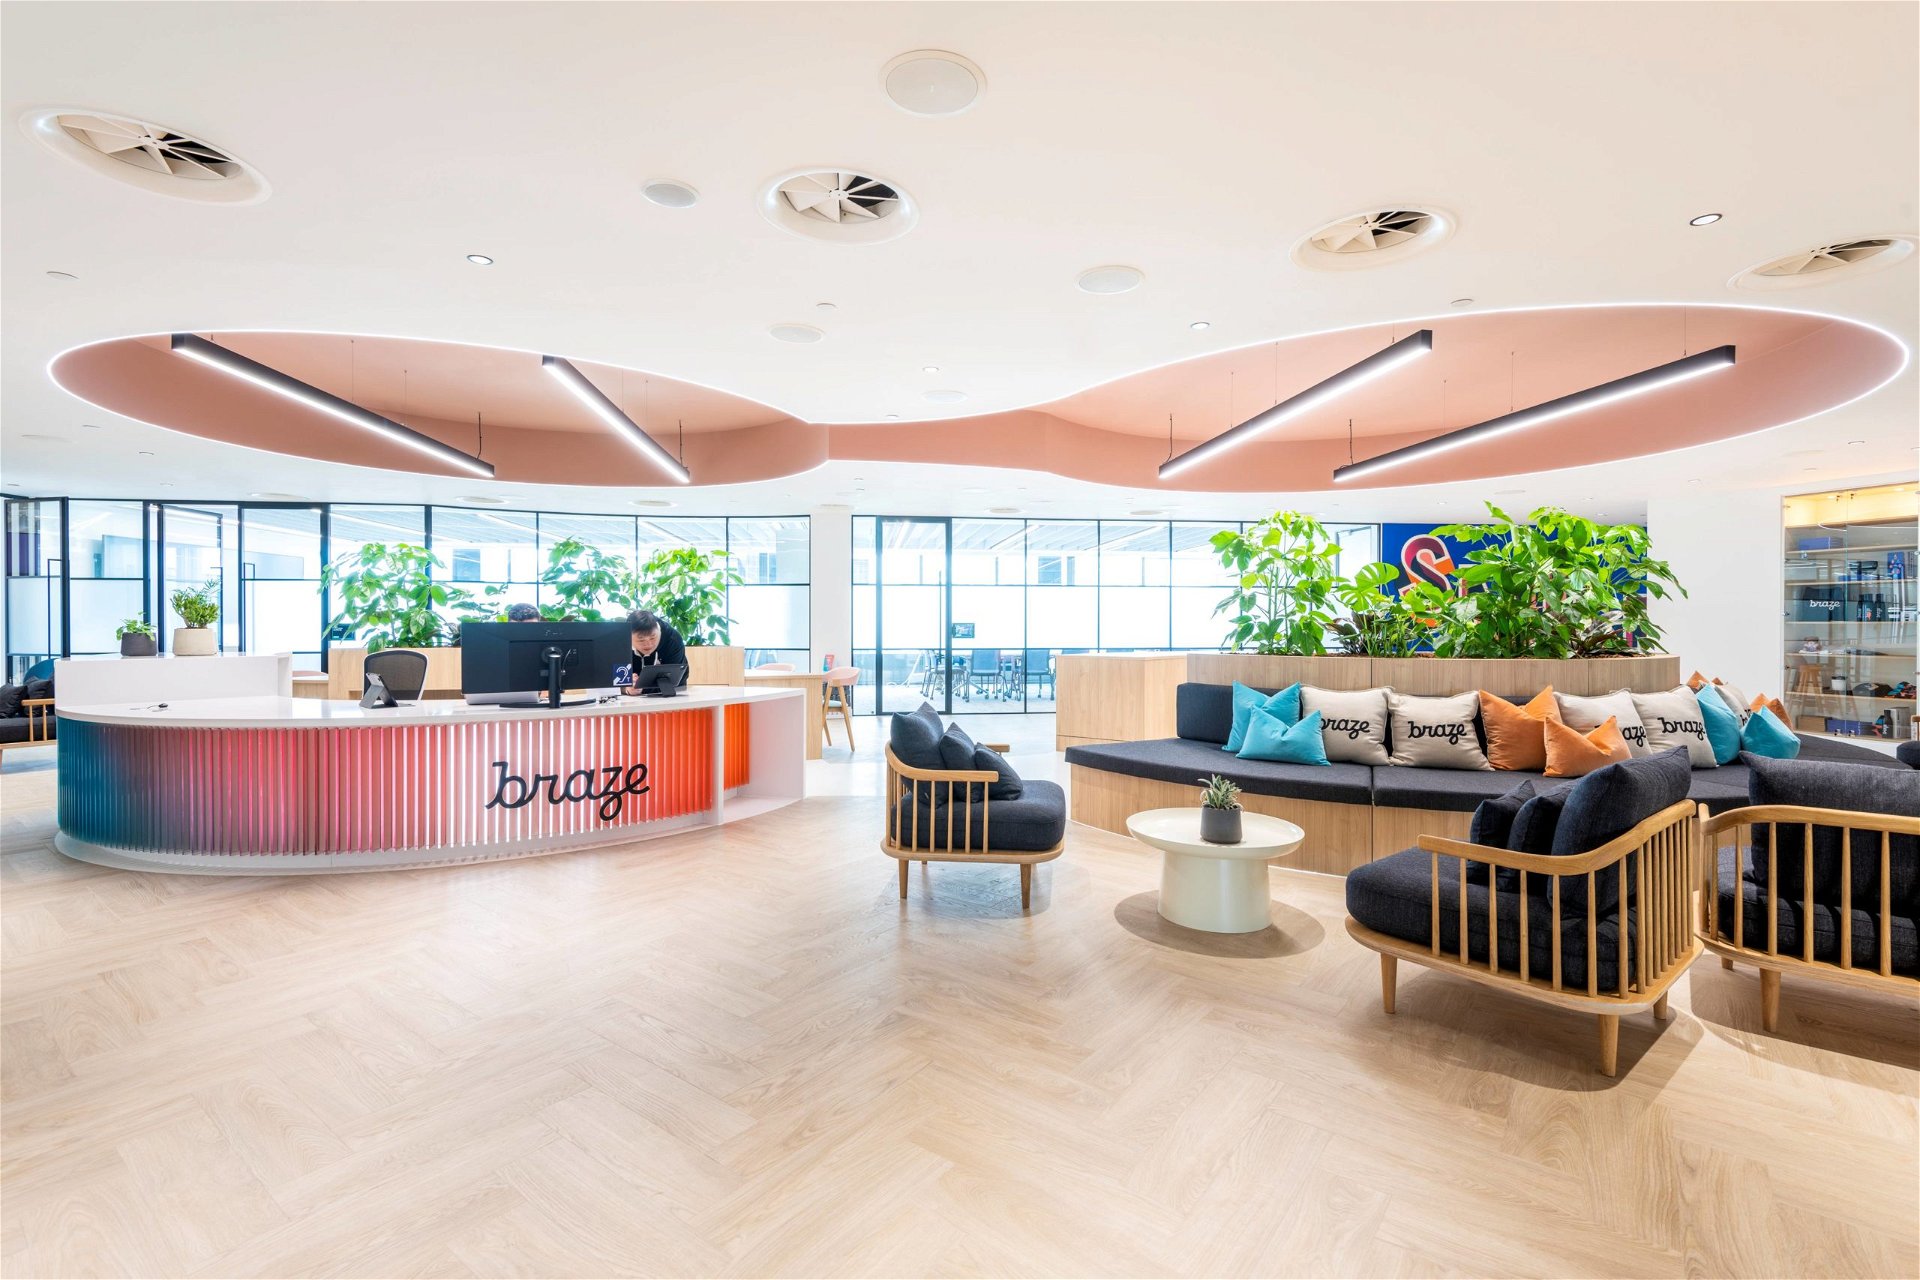 Following a period of rapid growth, consumer engagement platform Braze has recently moved into the City of London’s Broadgate Exchange Square.